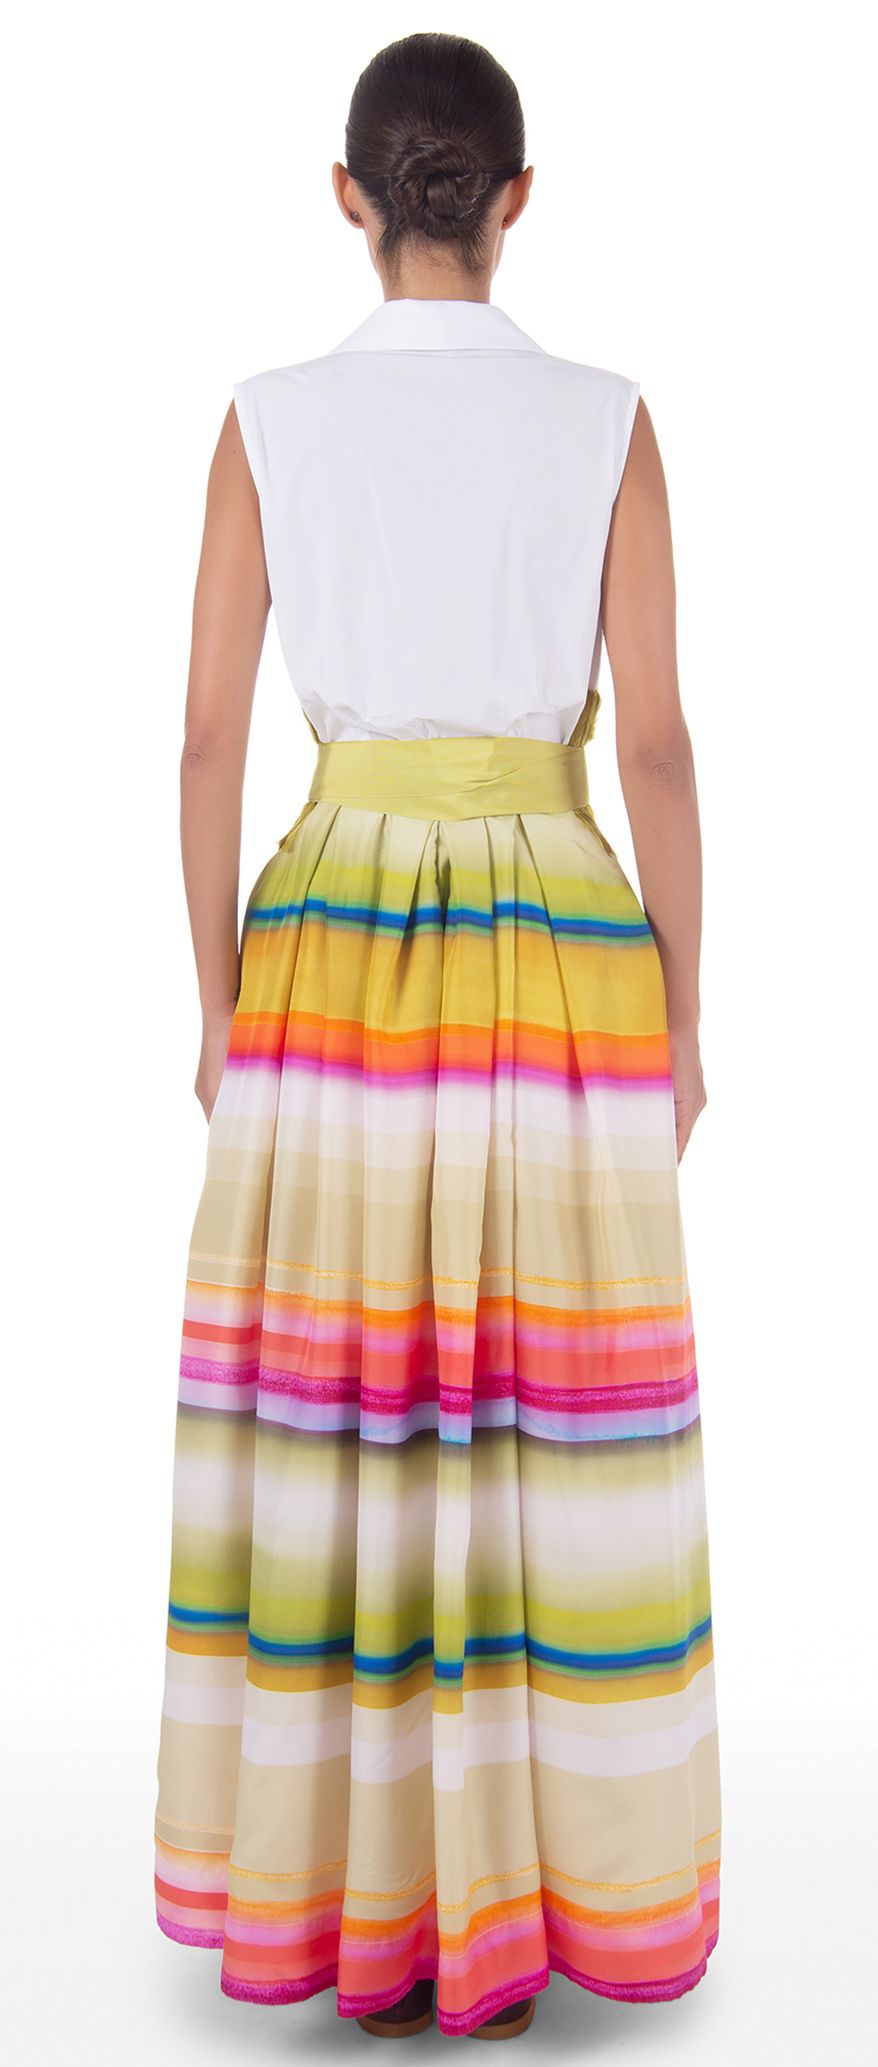 Aretty Sleeveless Dress with White Top and  Striped Silk Skirt